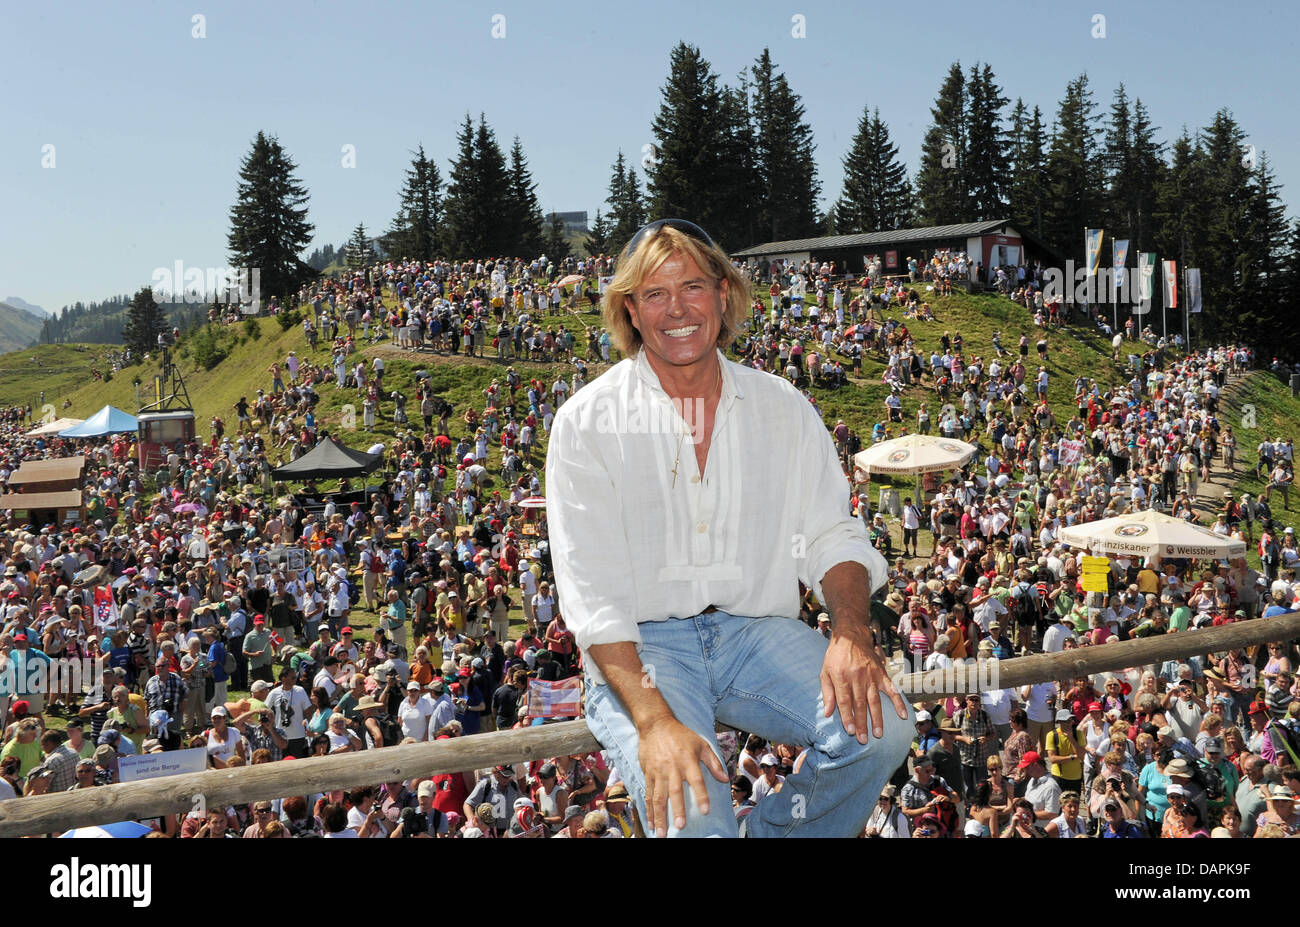 Folk musician Hansi Hinterseer poses in front his fans at the summit  station of the Hahnenkamm rail in Kitzbuehel, Austria, 25 August 2011.  Traditionally, each August hundreds of fans take a hike